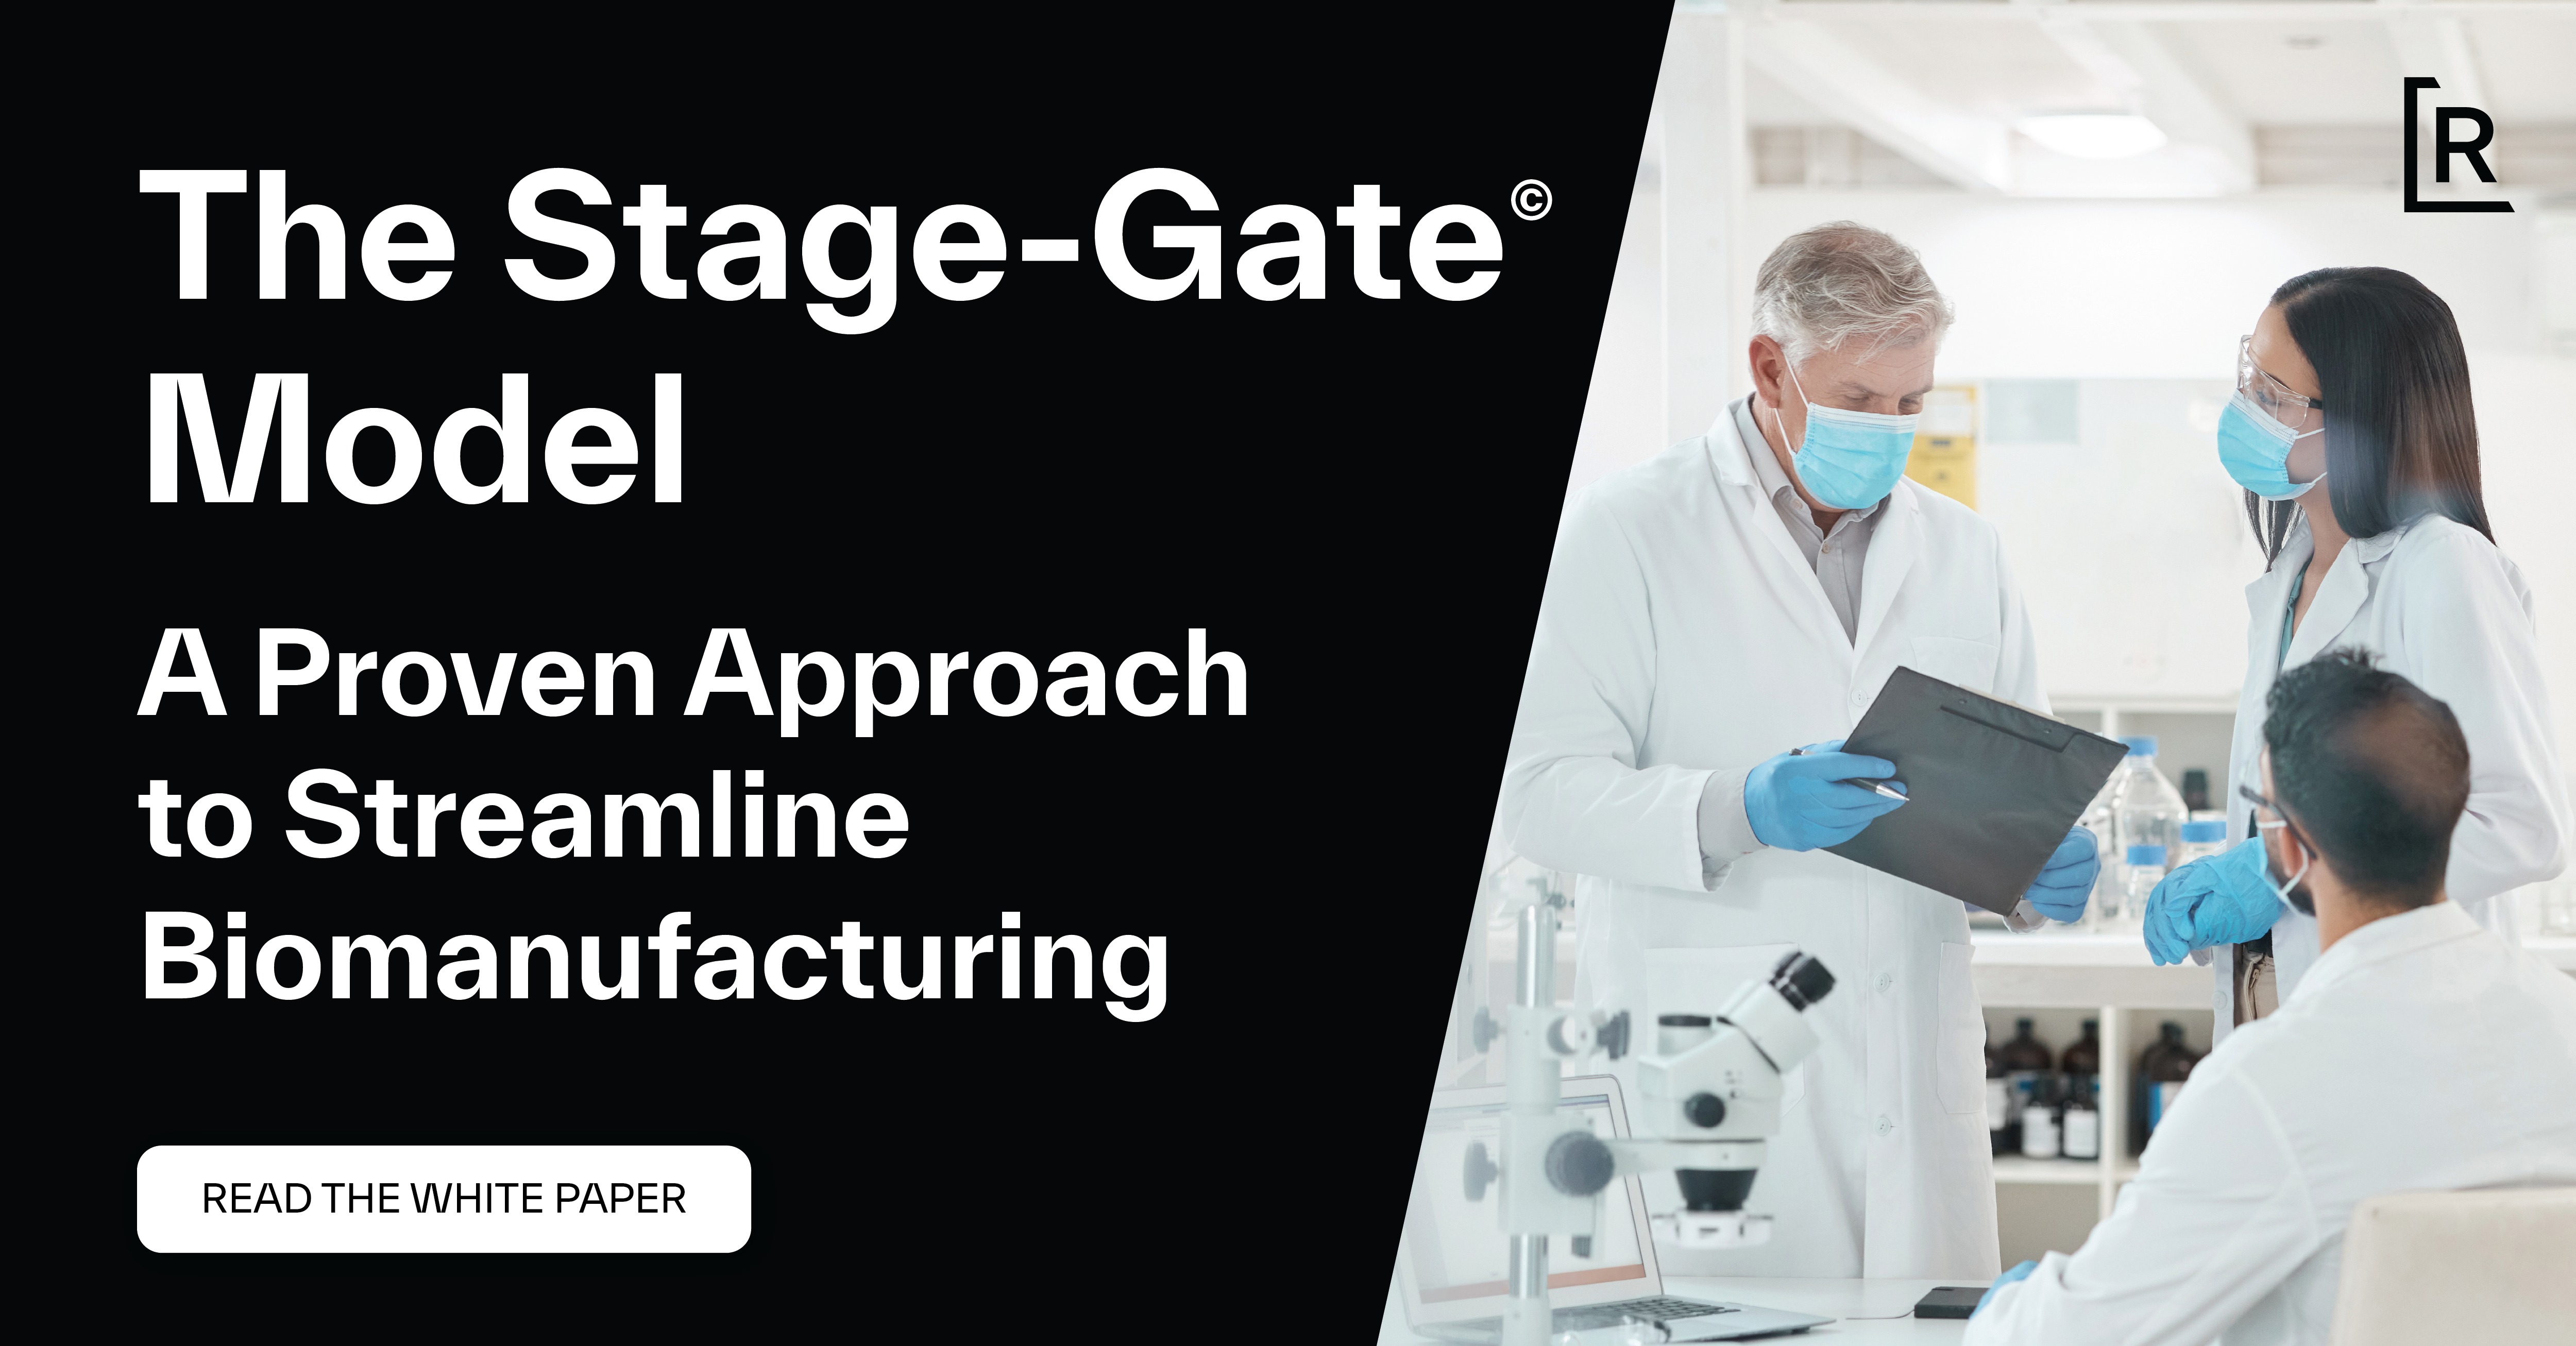 The Stage-Gate Model: A Proven Approach to Streamline Biomanufacturing - featured image